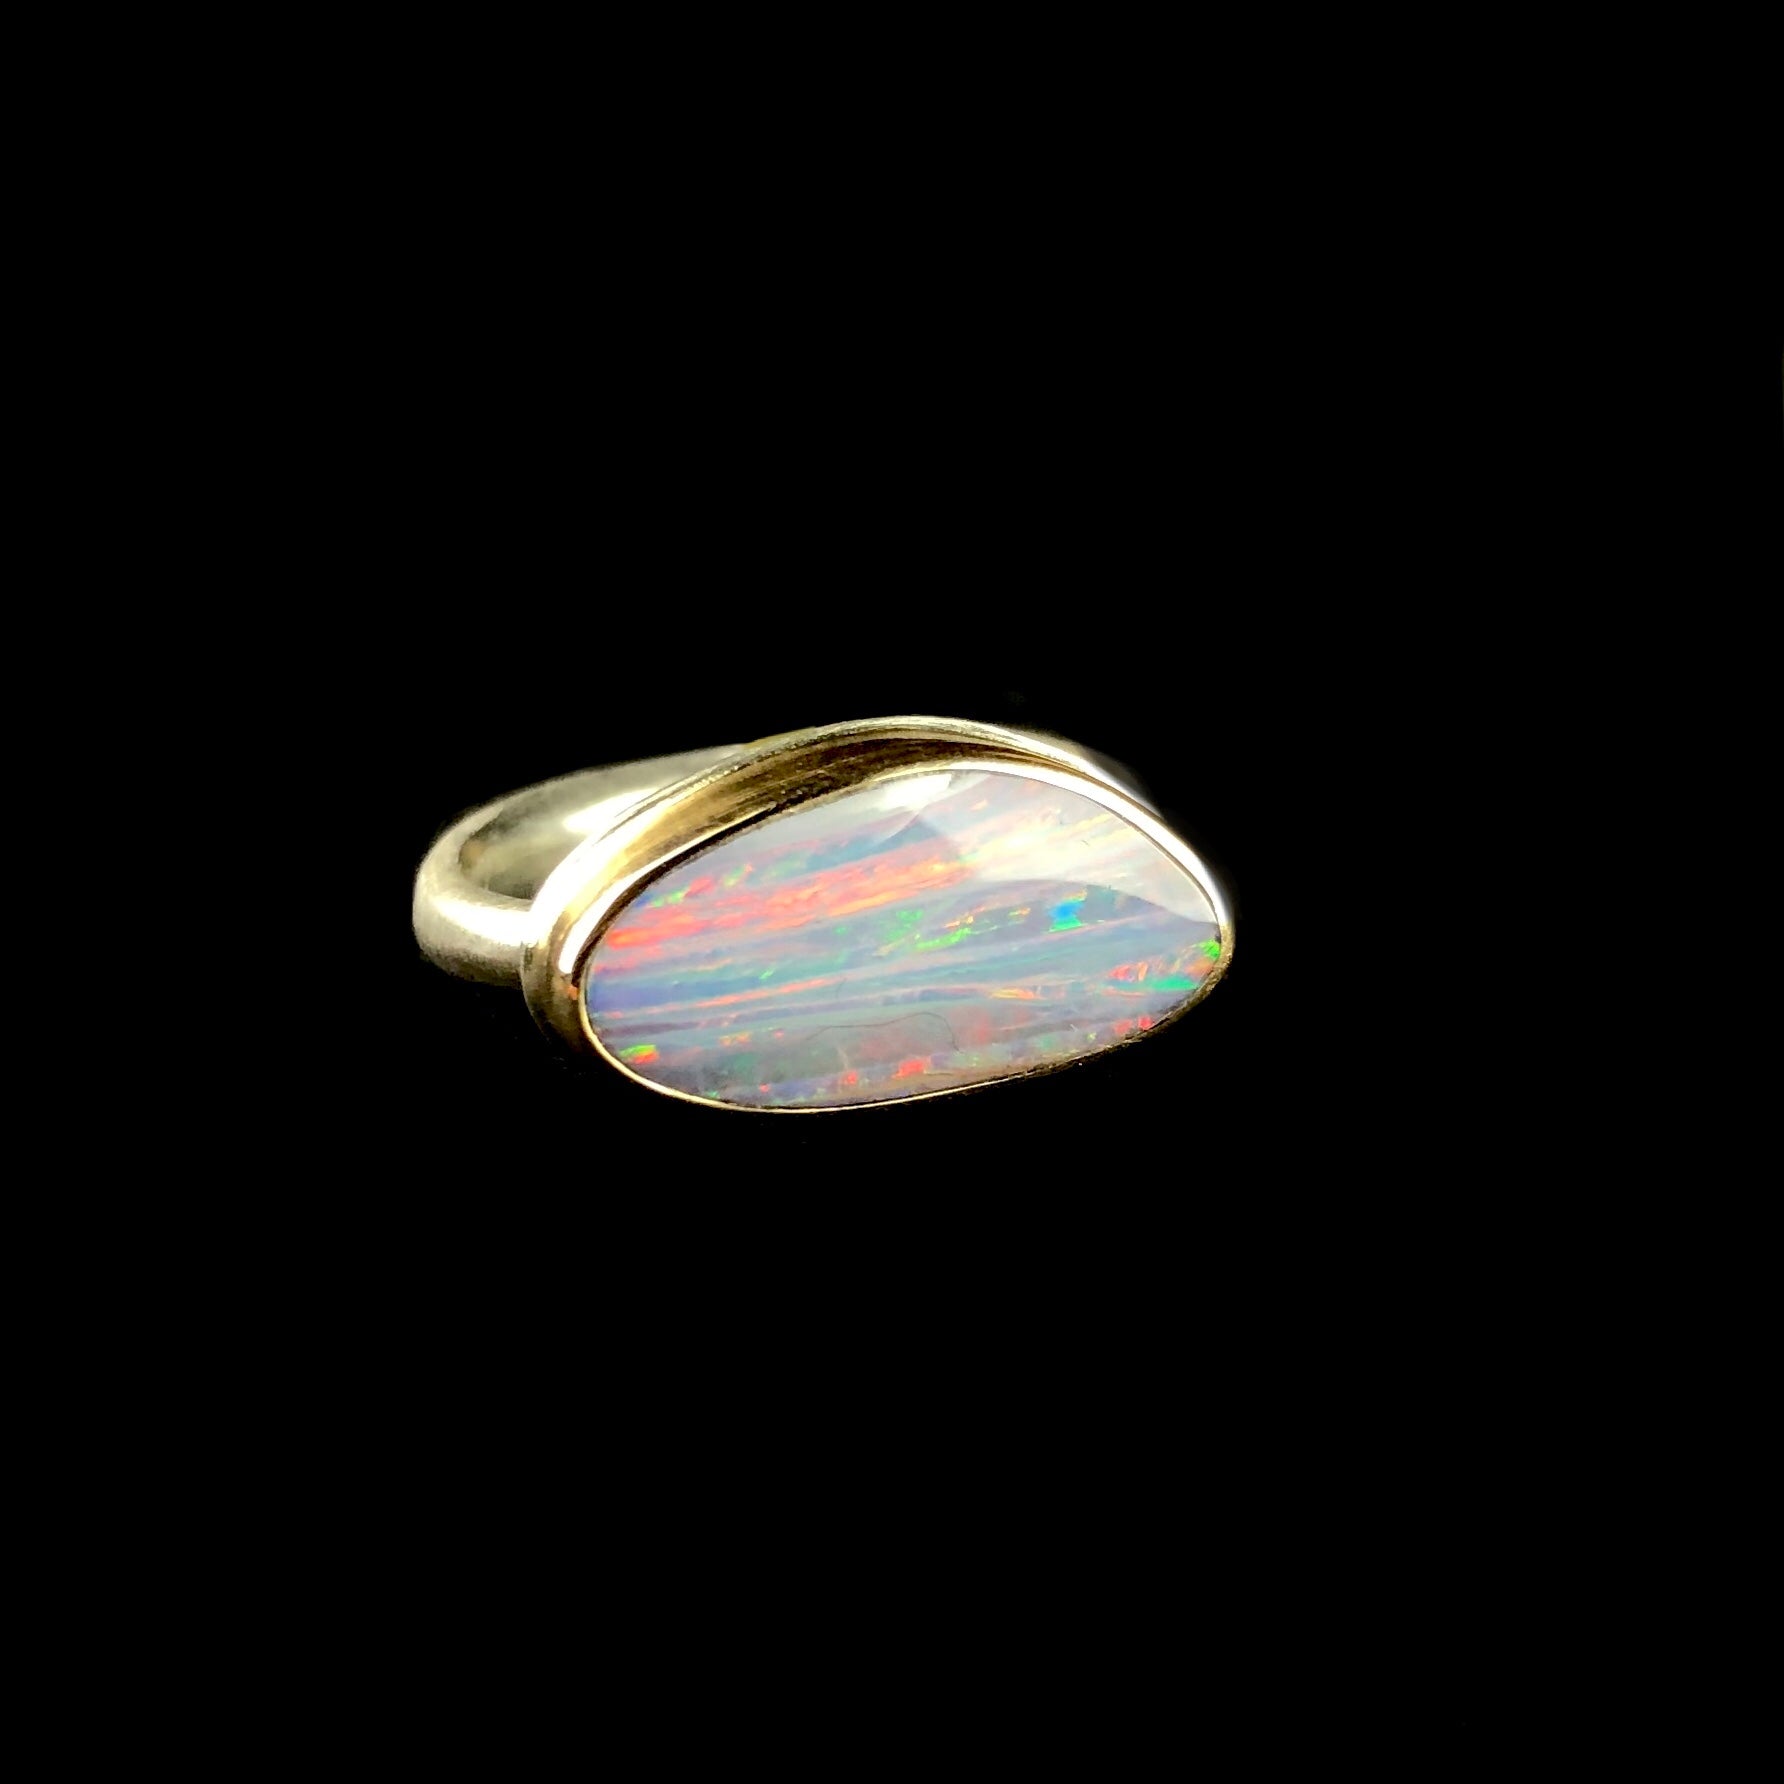 Pink, green, blue, green and smokey lilac colored boulder opal stone ring